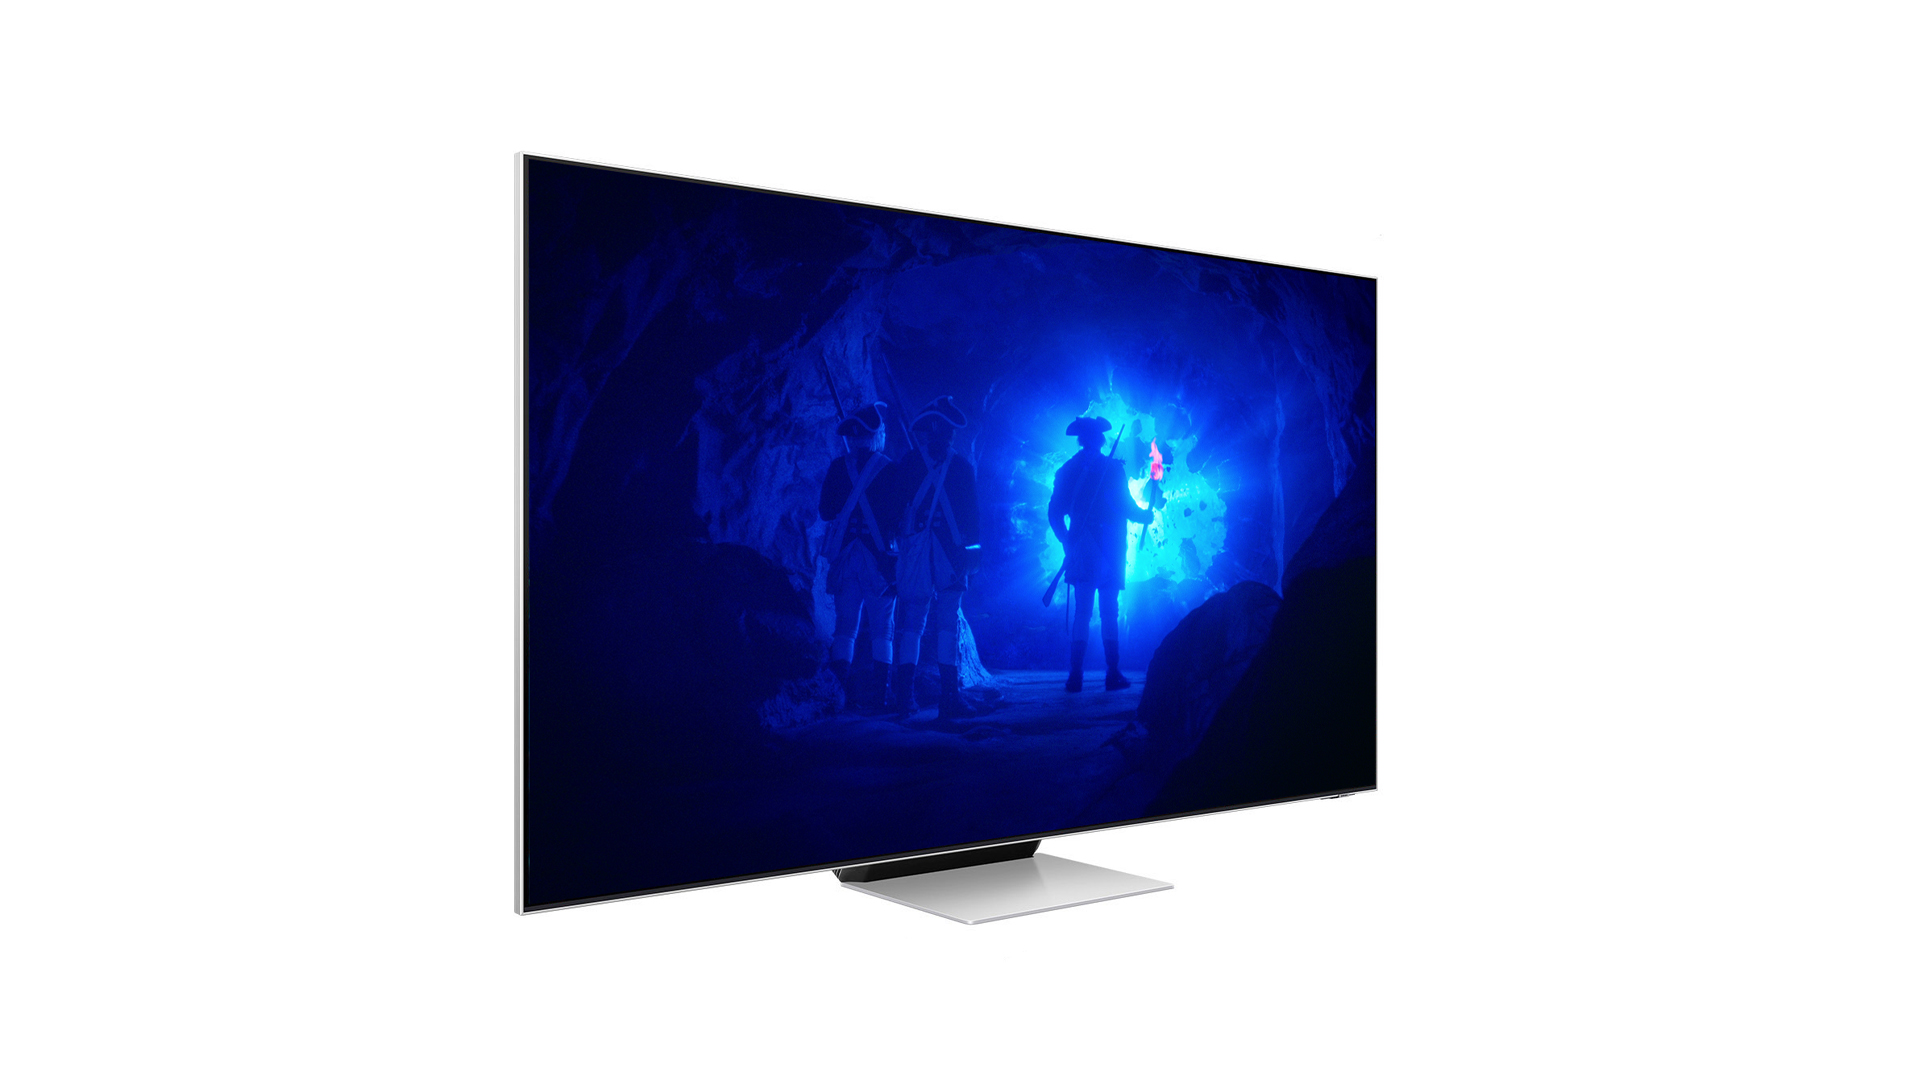 Samsung NEO QLED TVs: AMD FreeSync Pro support joins HDMI 2.1 compatibility  for new Mini LED displays -  News